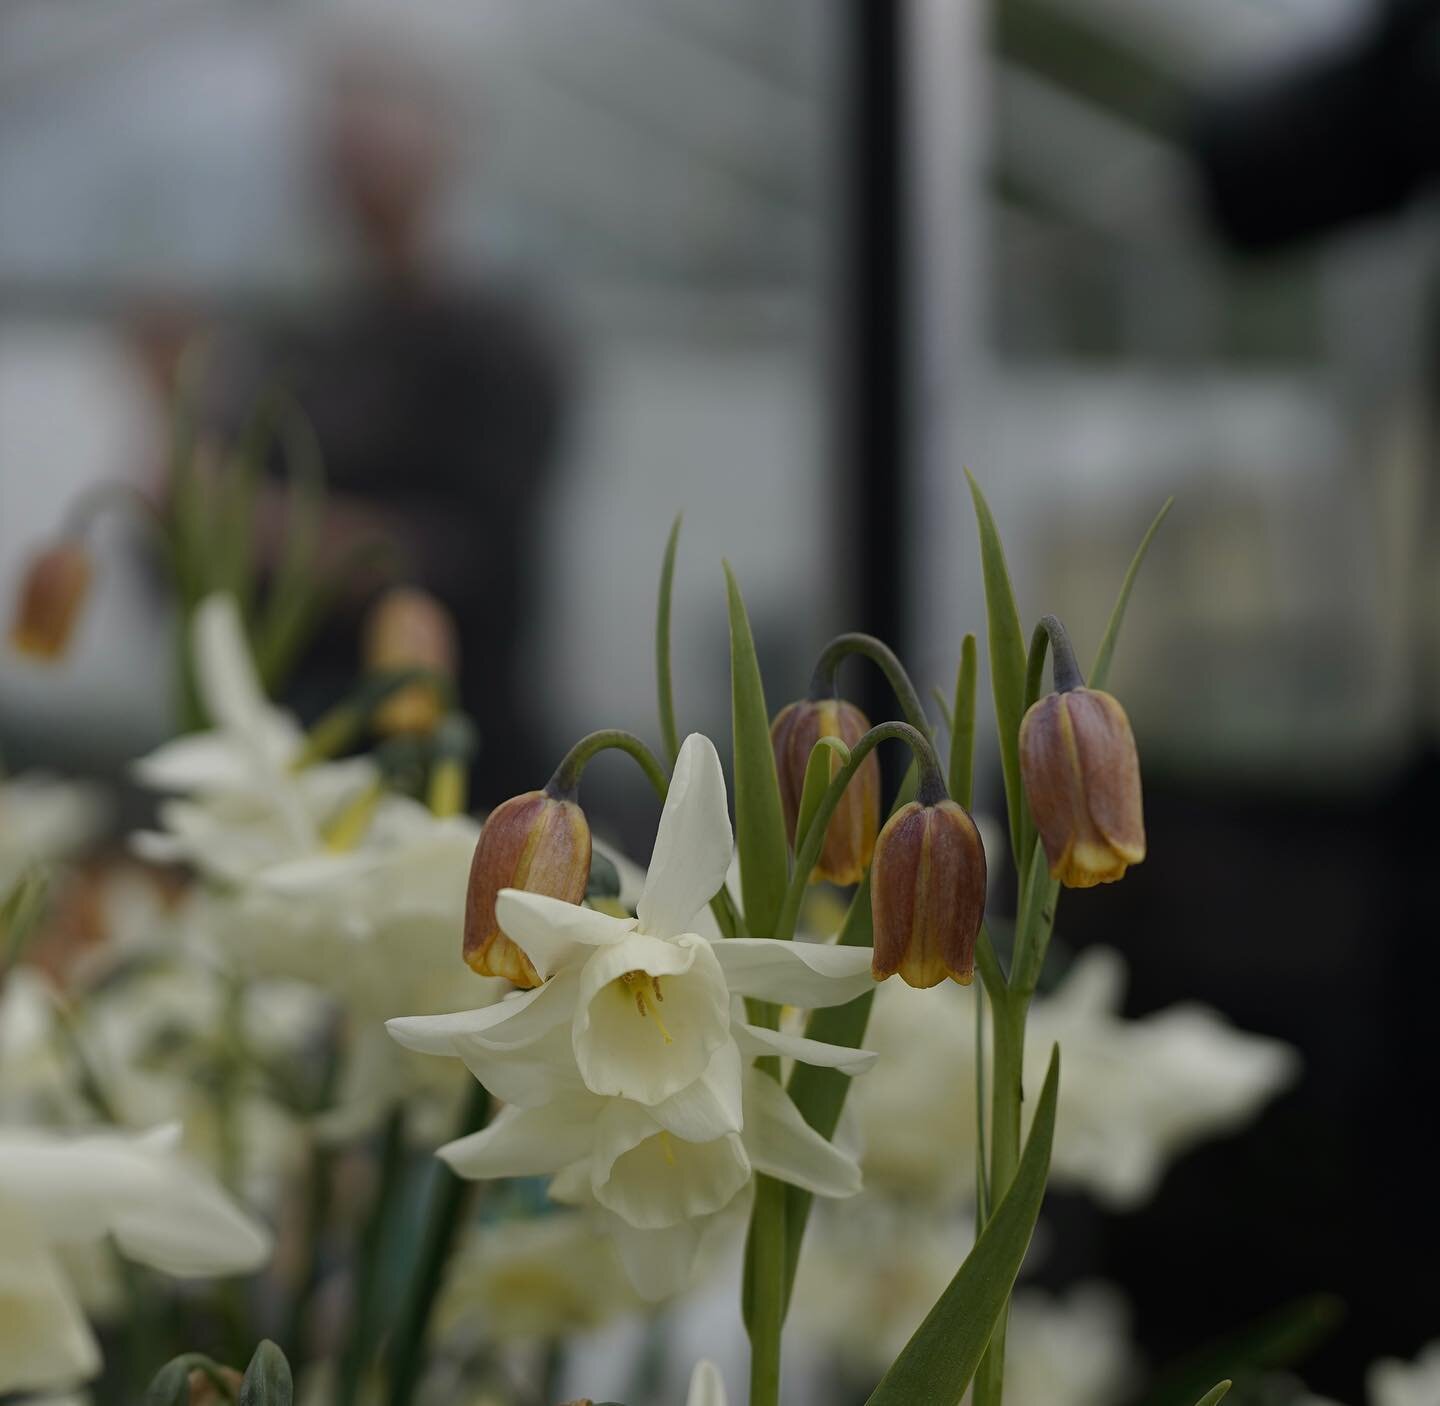 Heavenly combination @gandgorgeousflowers 
Love this delicate dusty brown Fritillaria uva-vulpis with the Narcissus.

Truly magical setting for the master class with @eva_nemeth 

Could happily have spent a week here photographing the farm and flower